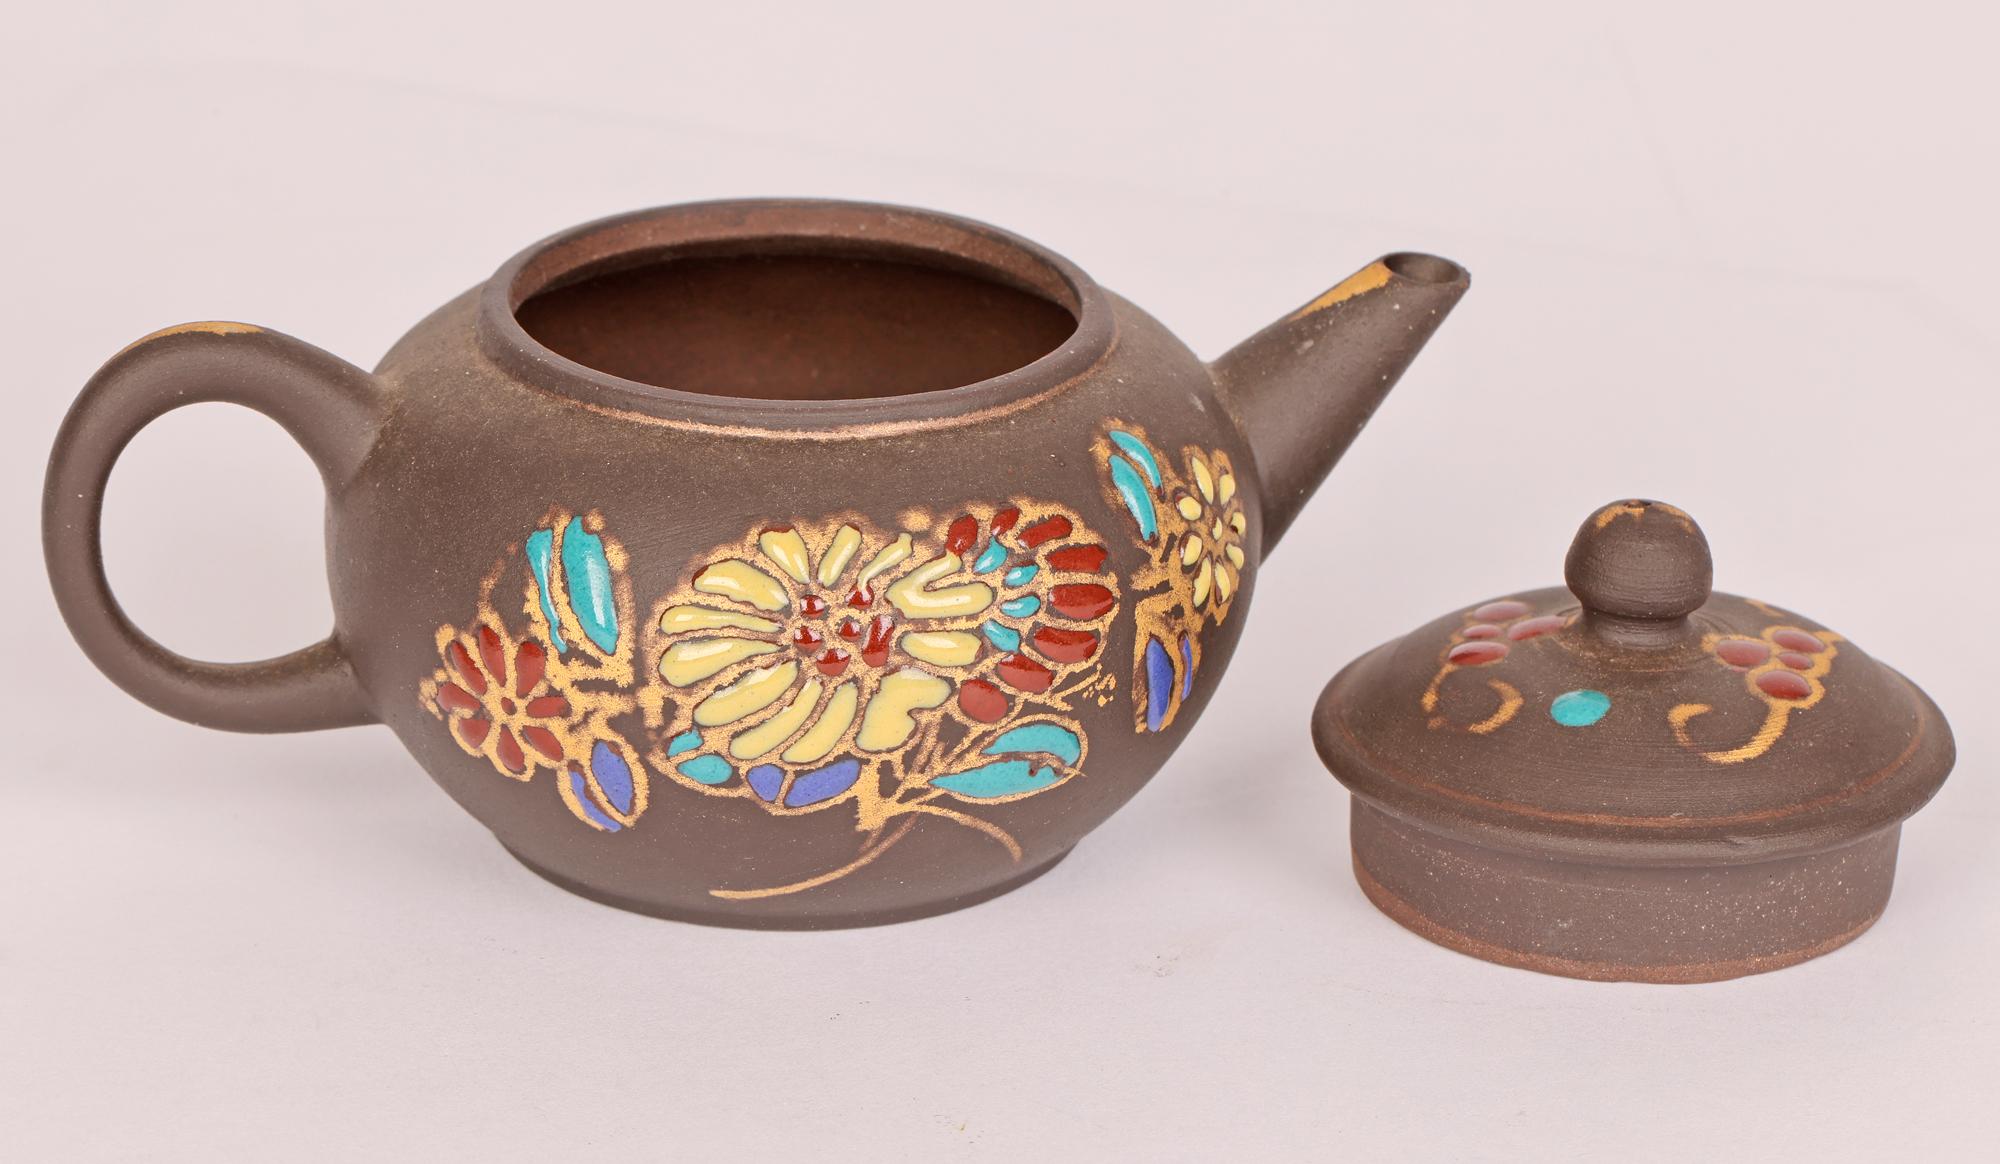 Chinese Miniature Yixing Teapot with Applied Floral Enamel Designs  In Good Condition For Sale In Bishop's Stortford, Hertfordshire